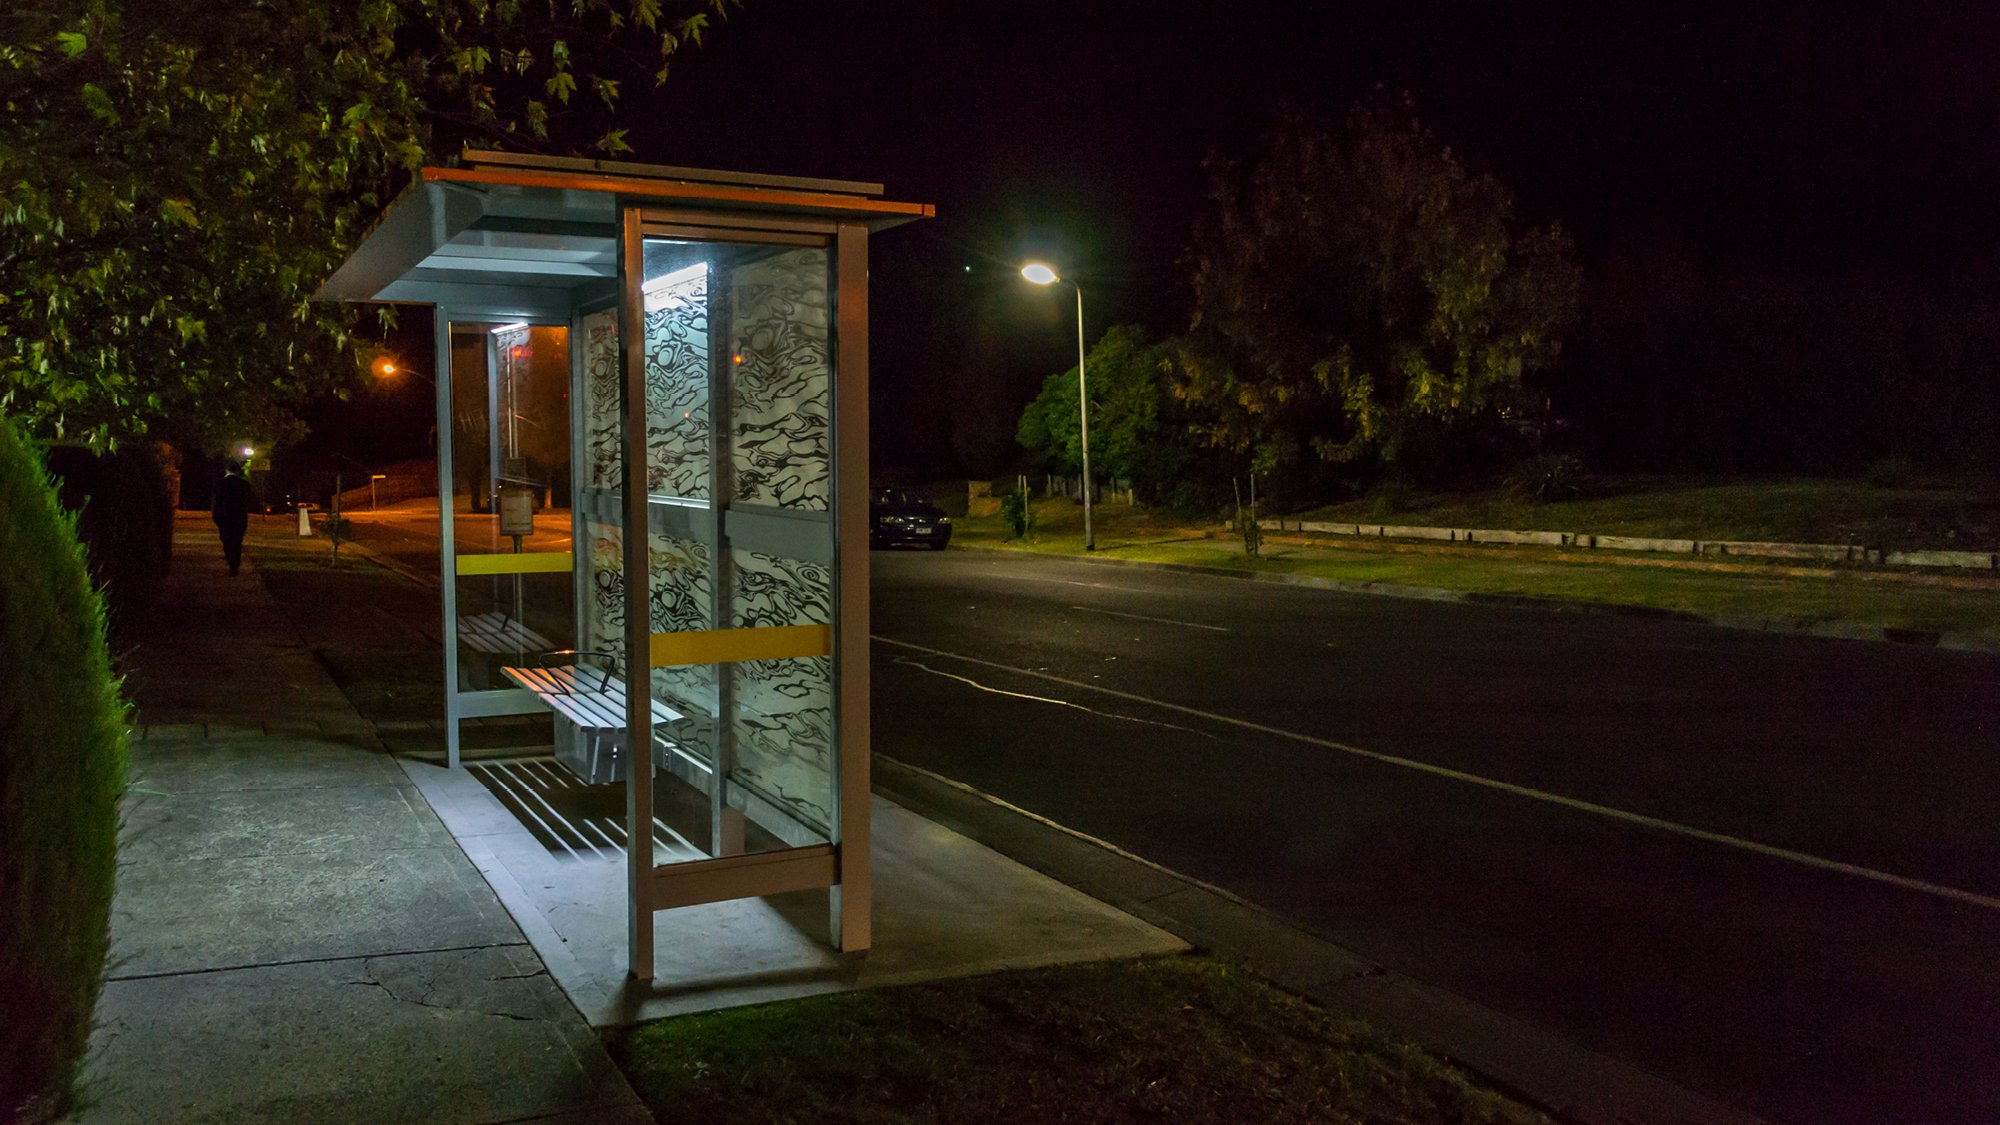 An empty bus stop in a suburban street at night time